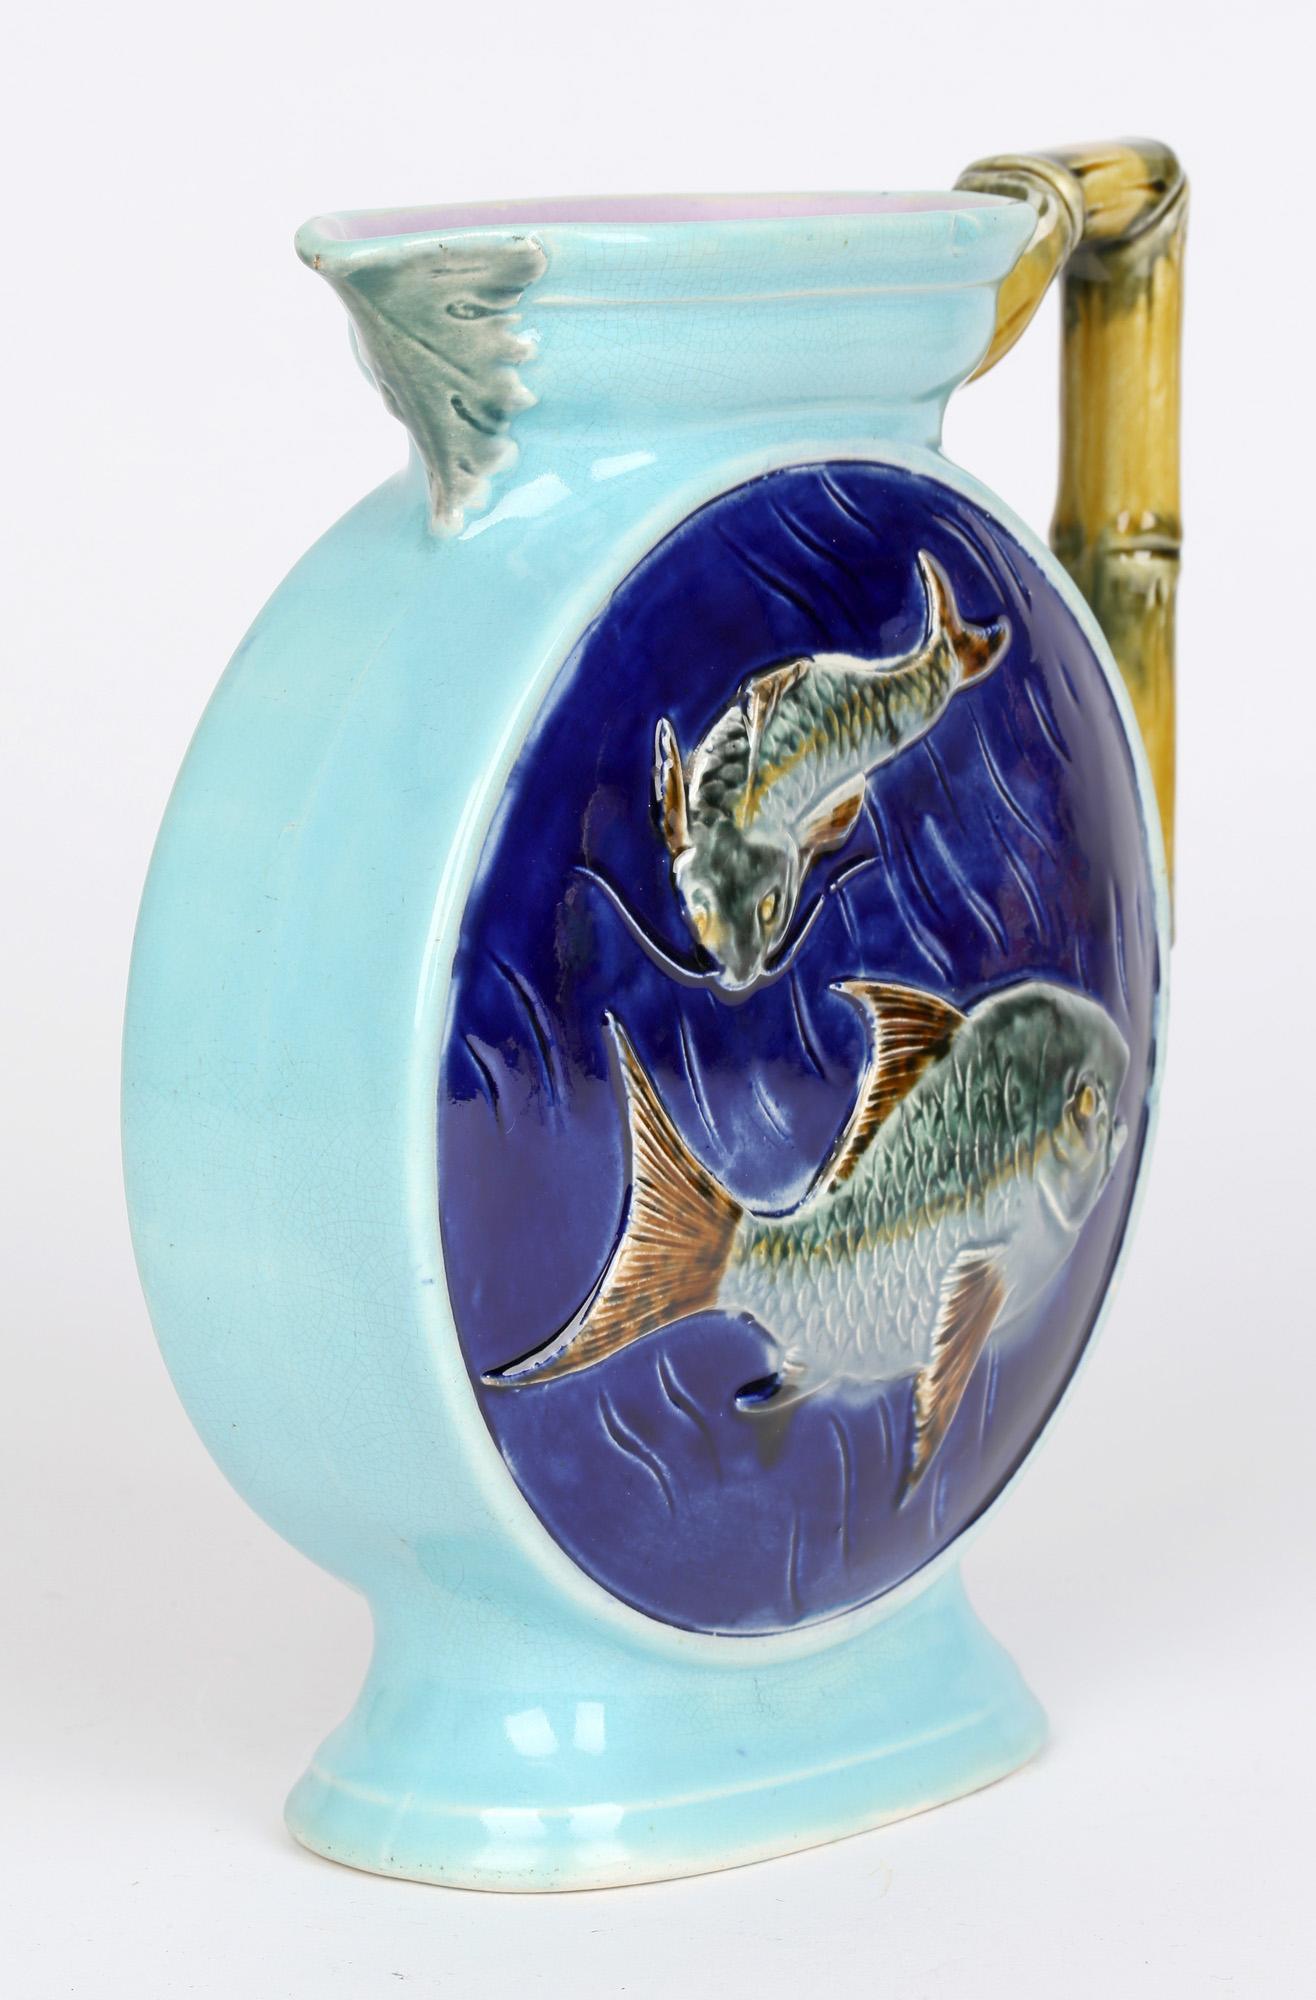 Pottery majolica glazed handled jug or rounded moon shape decorated in relief with two swimming fish by Joseph Holdcroft and with date marks for 1877. The jug is hand painted in tones of green, brown, blue and yellow with pink glazes to the inner